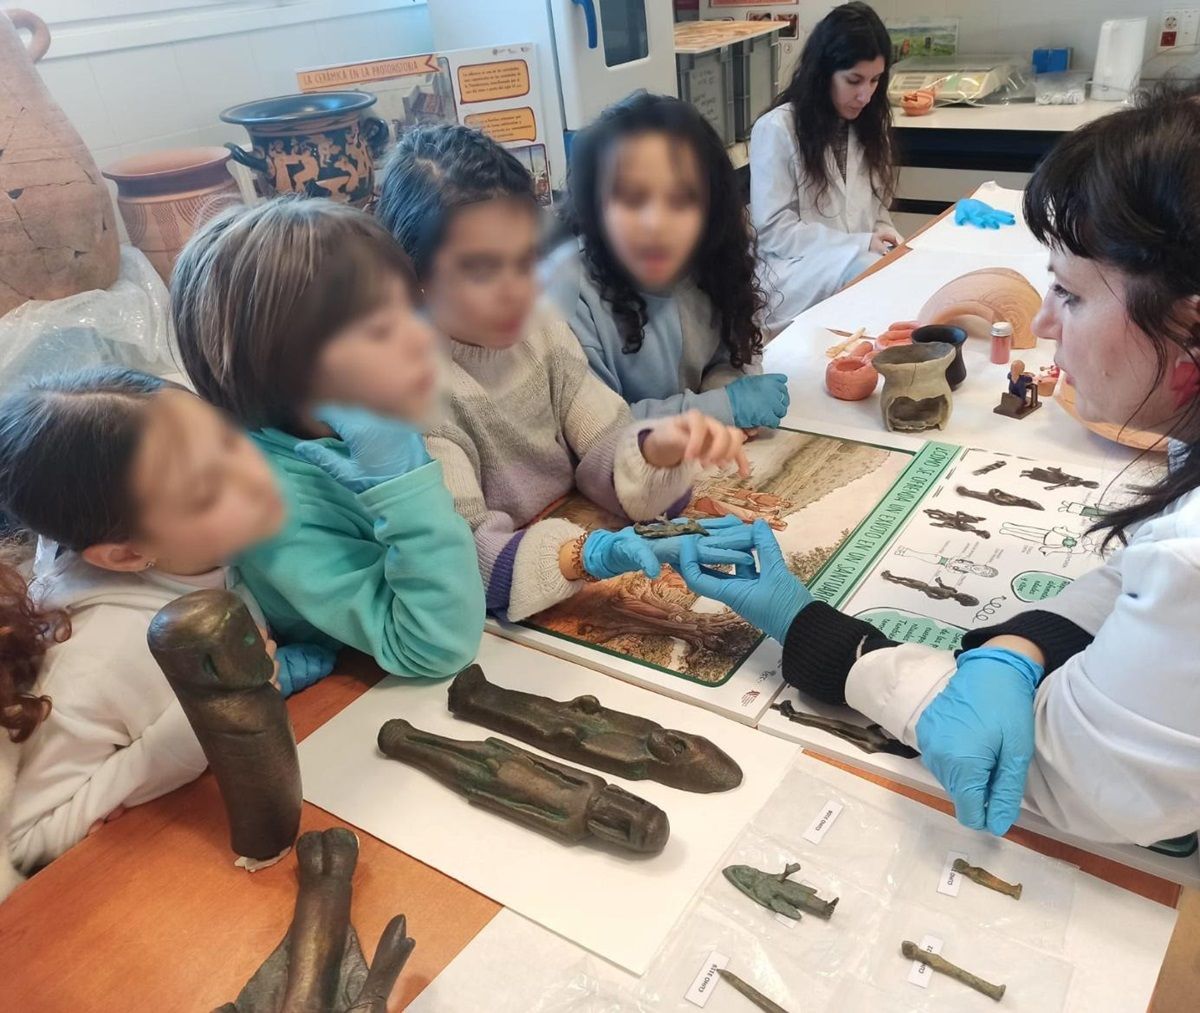 A woman holds out an artefact which two children are looking at